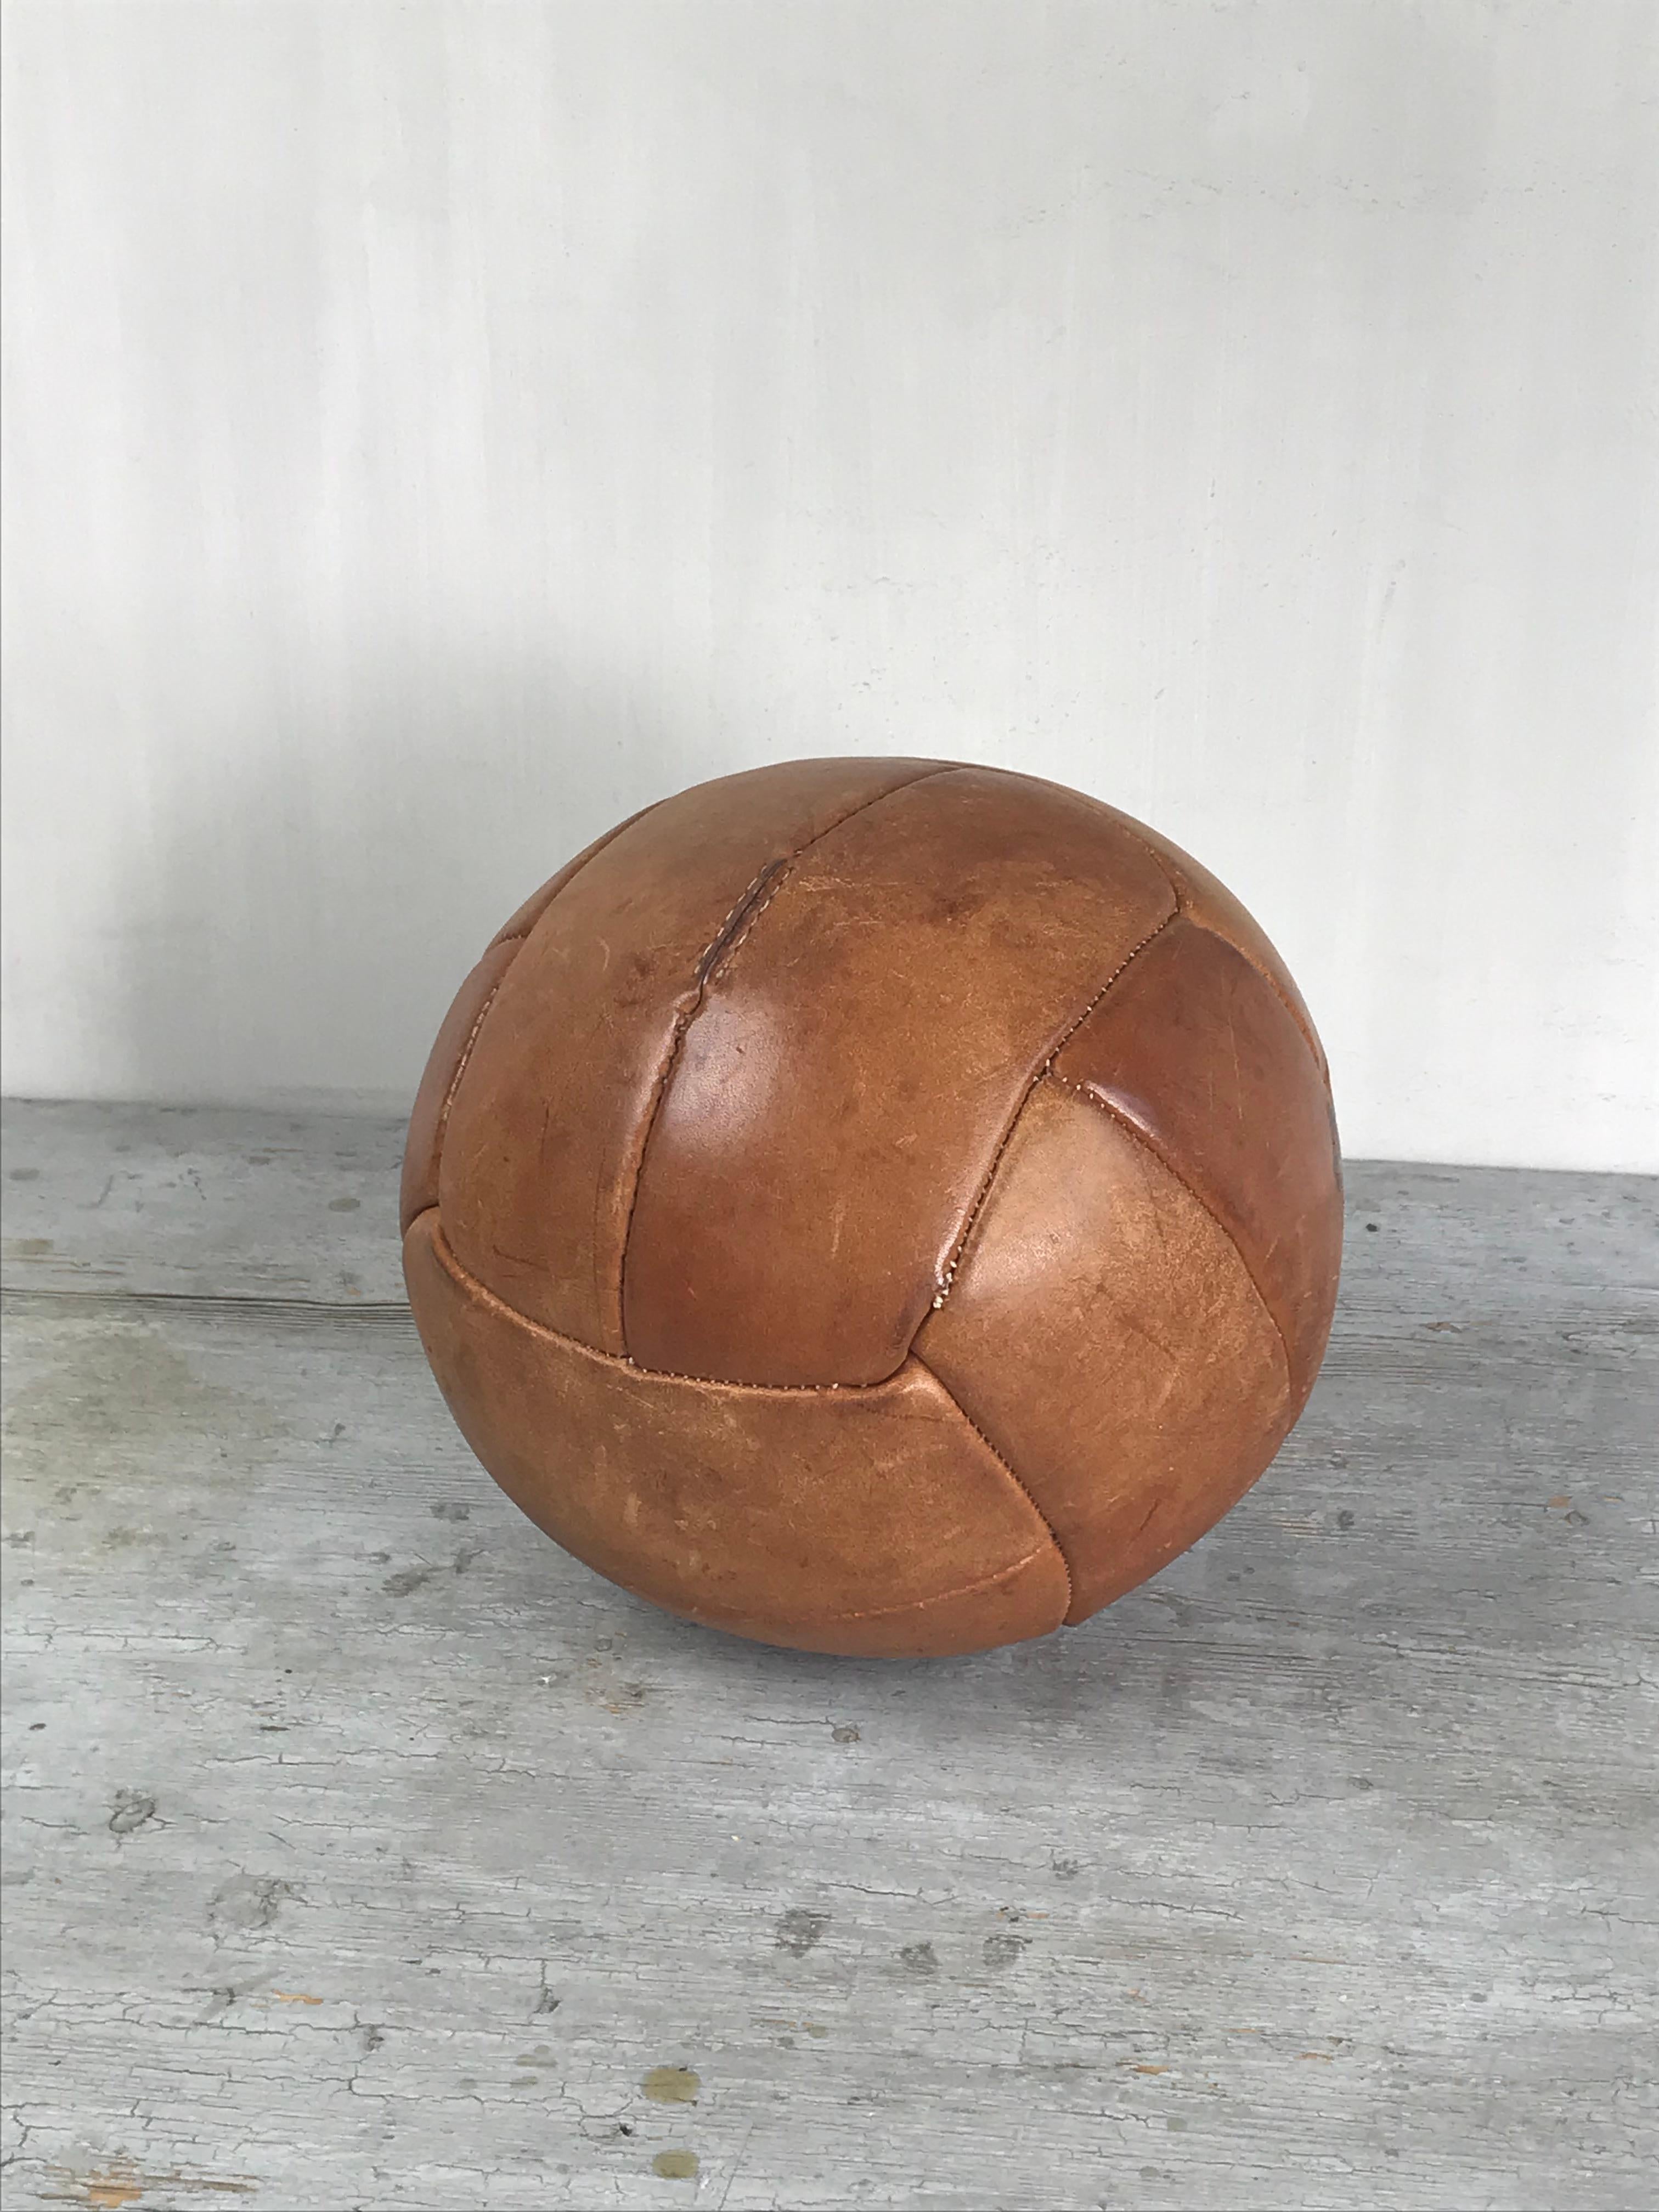 This set of medicine balls in leather is in very good condition.
Both a practical item and a beautiful duo to look at.
The natural weathering of the leather gives it an original patina.

Despite use in top condition and no damage.

We ship